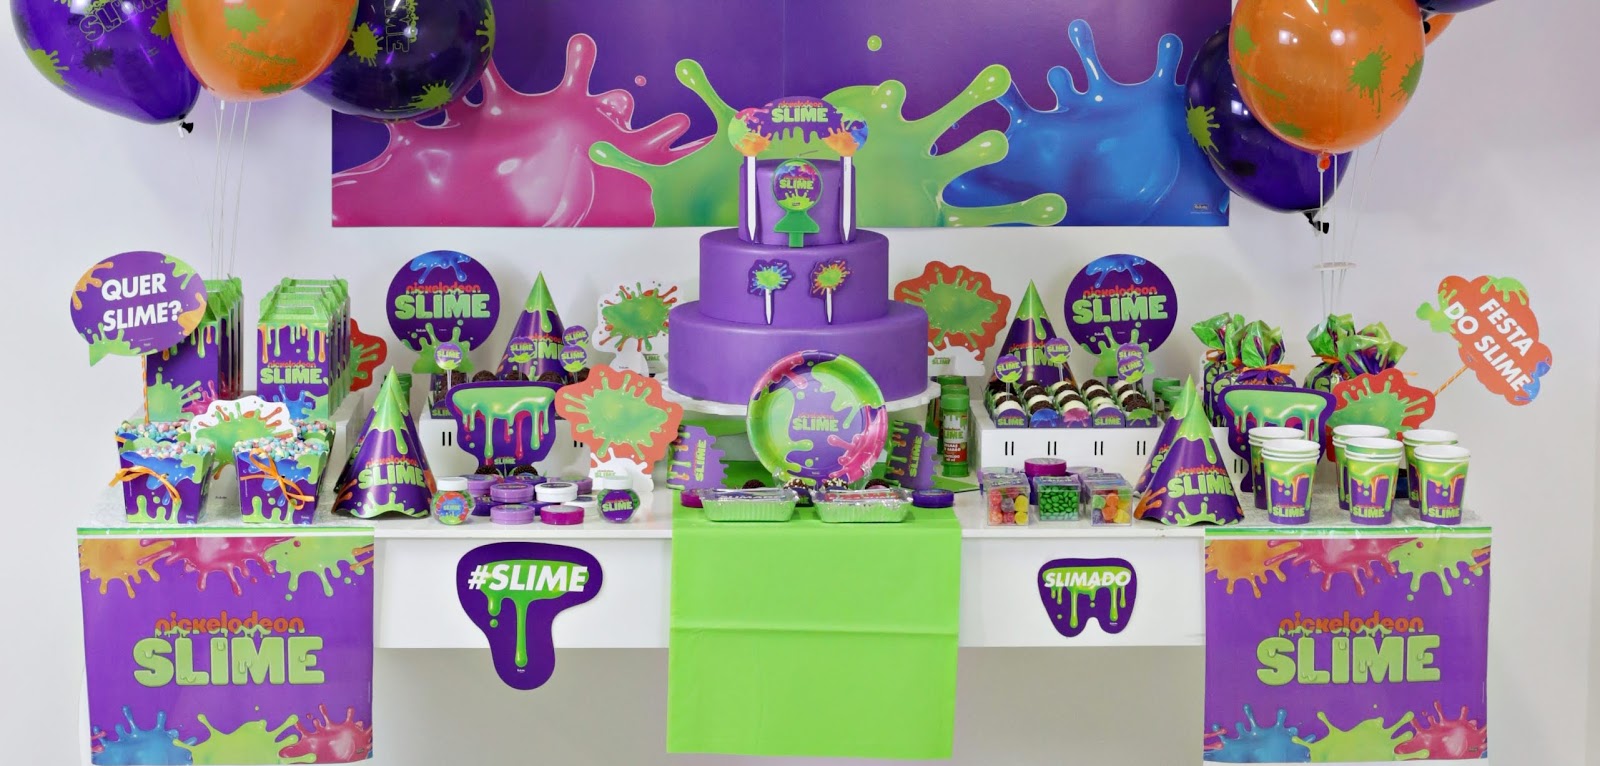 NickALive!: Nickelodeon Brazil Partners with Festcolor to Launch